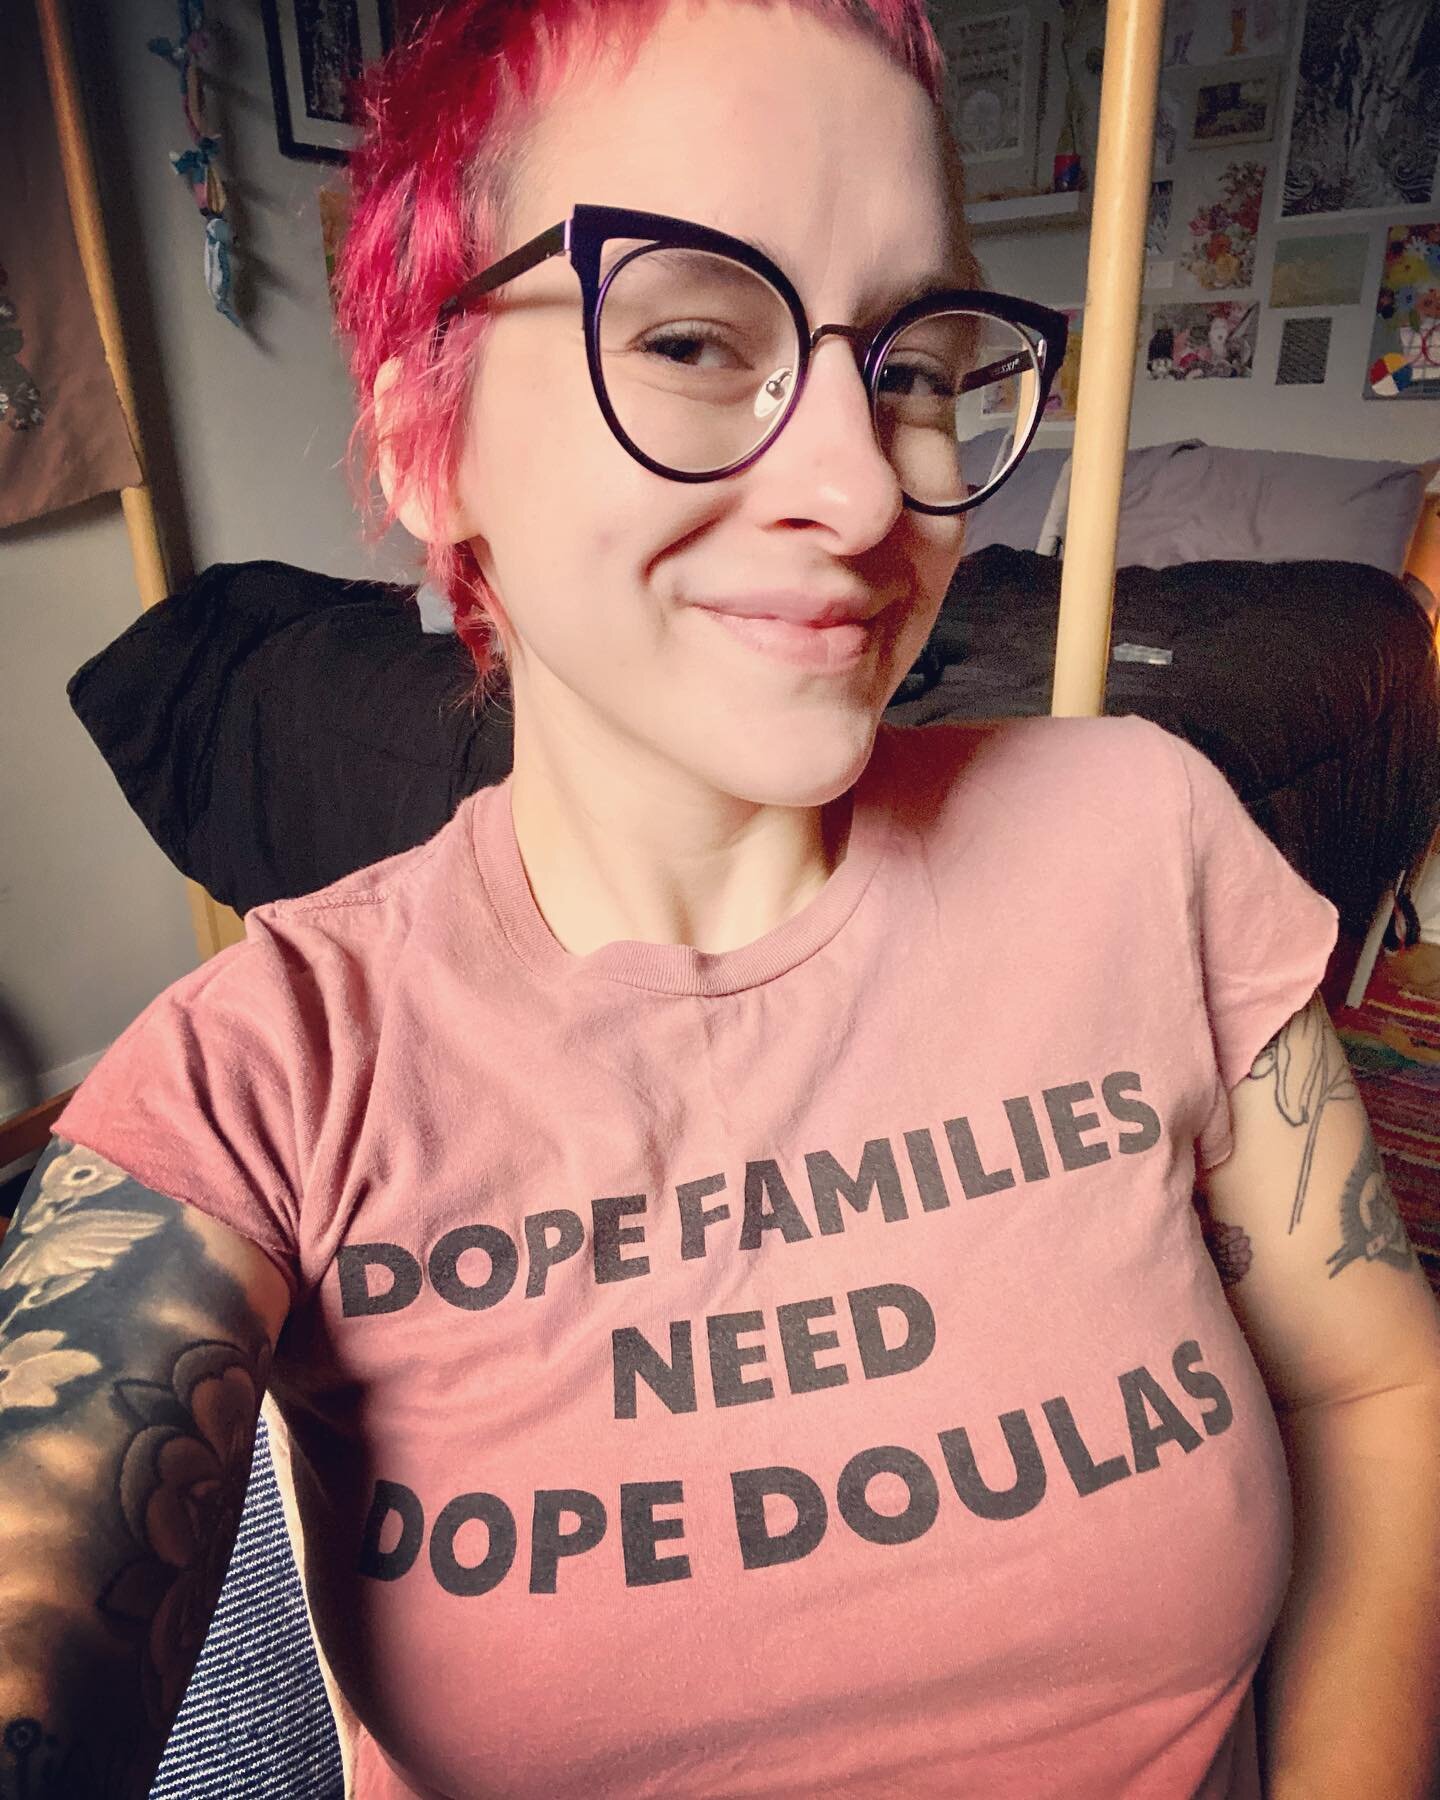 Oh hi! ❤️

I&rsquo;m attempting to please the algorithm gods with a pic of my mug so I can let y&rsquo;all know that I&rsquo;m booking up my calendar for postpartum support in the spring! 

I have openings in my schedule for just a few days in April,